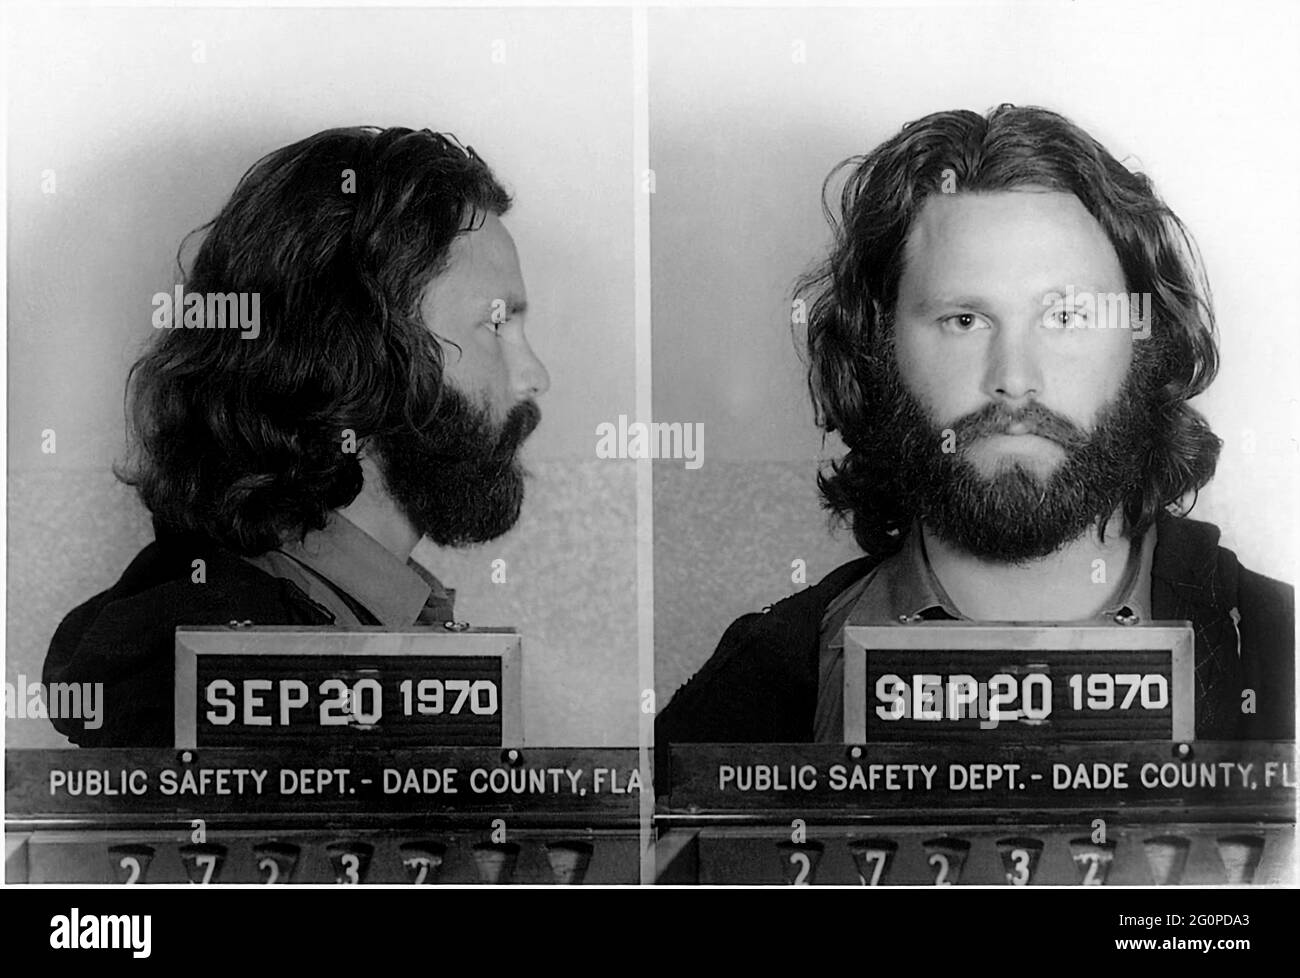 1970, 20 september, Dade County , FLORIDA , USA : The celebrated Rockstar singer and composer JIM MORRISON ( 1943 - 1971 ) of THE DOORS ( founded in 1965 ) when was arrested by Police Department in the official mug-shot . Jim had been charged  on misdemeanor indecent exposure and profanity charges . The singer was busted after he exposed himself during a March 1969 concert in Miami . Unknown photographer , Dade County's Public Safety Department . - HISTORY - FOTO STORICHE  - MUSIC - MUSICA - cantante - COMPOSITORE - ROCK STAR - ARRESTO - Arrestation - ARRESTATO DALLA POLIZIA - FOTO SEGNALETICA Stock Photo